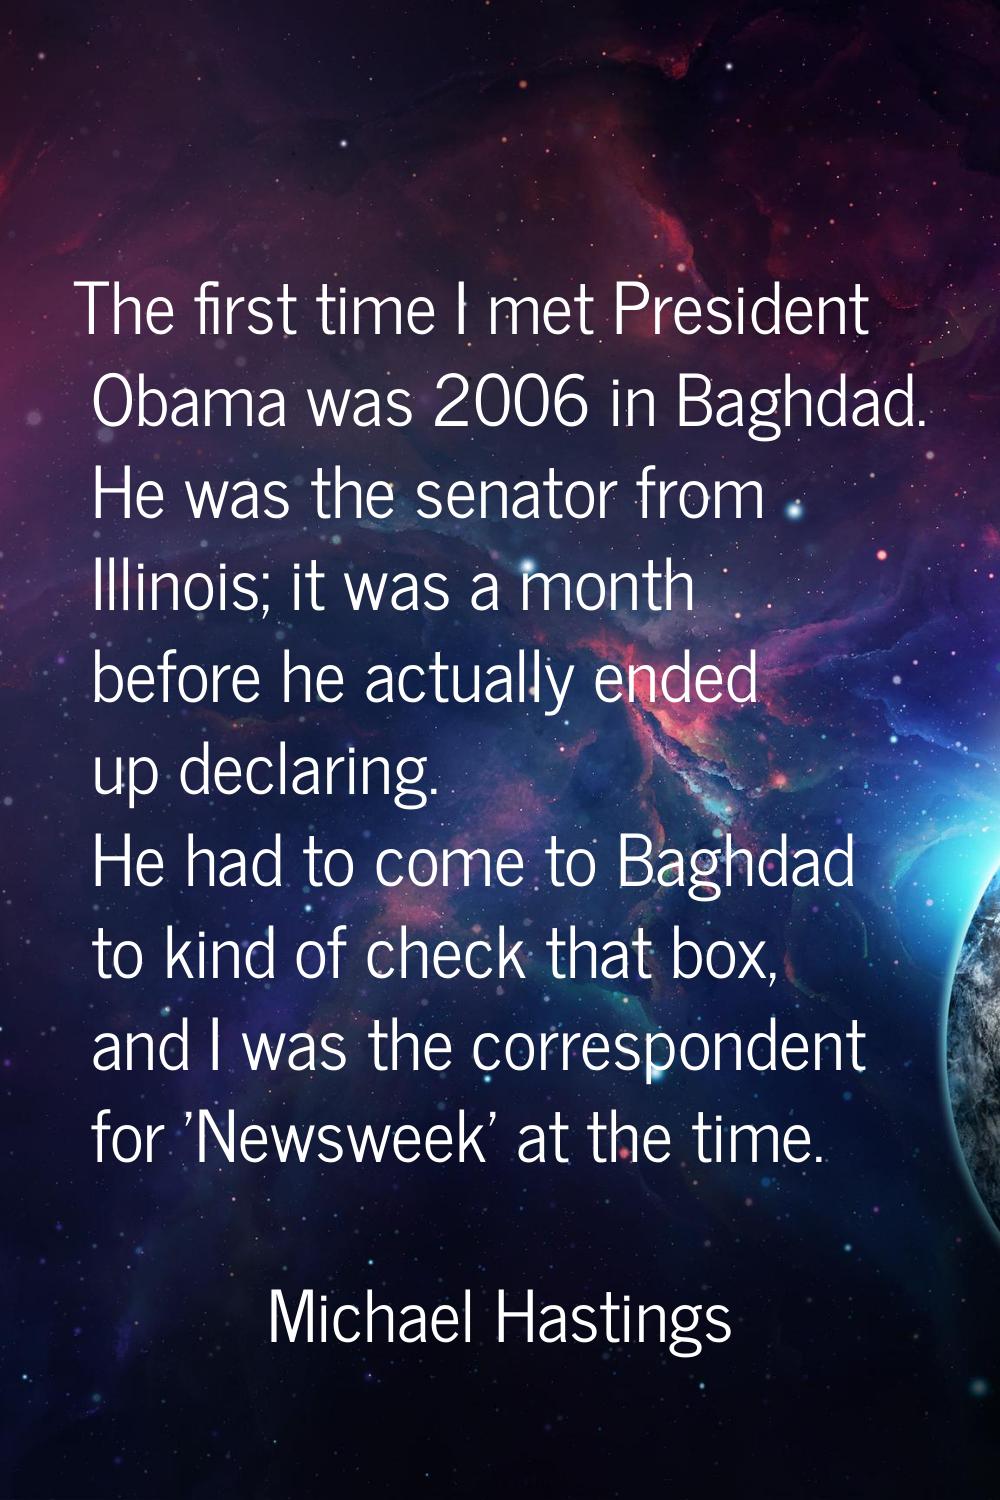 The first time I met President Obama was 2006 in Baghdad. He was the senator from Illinois; it was 